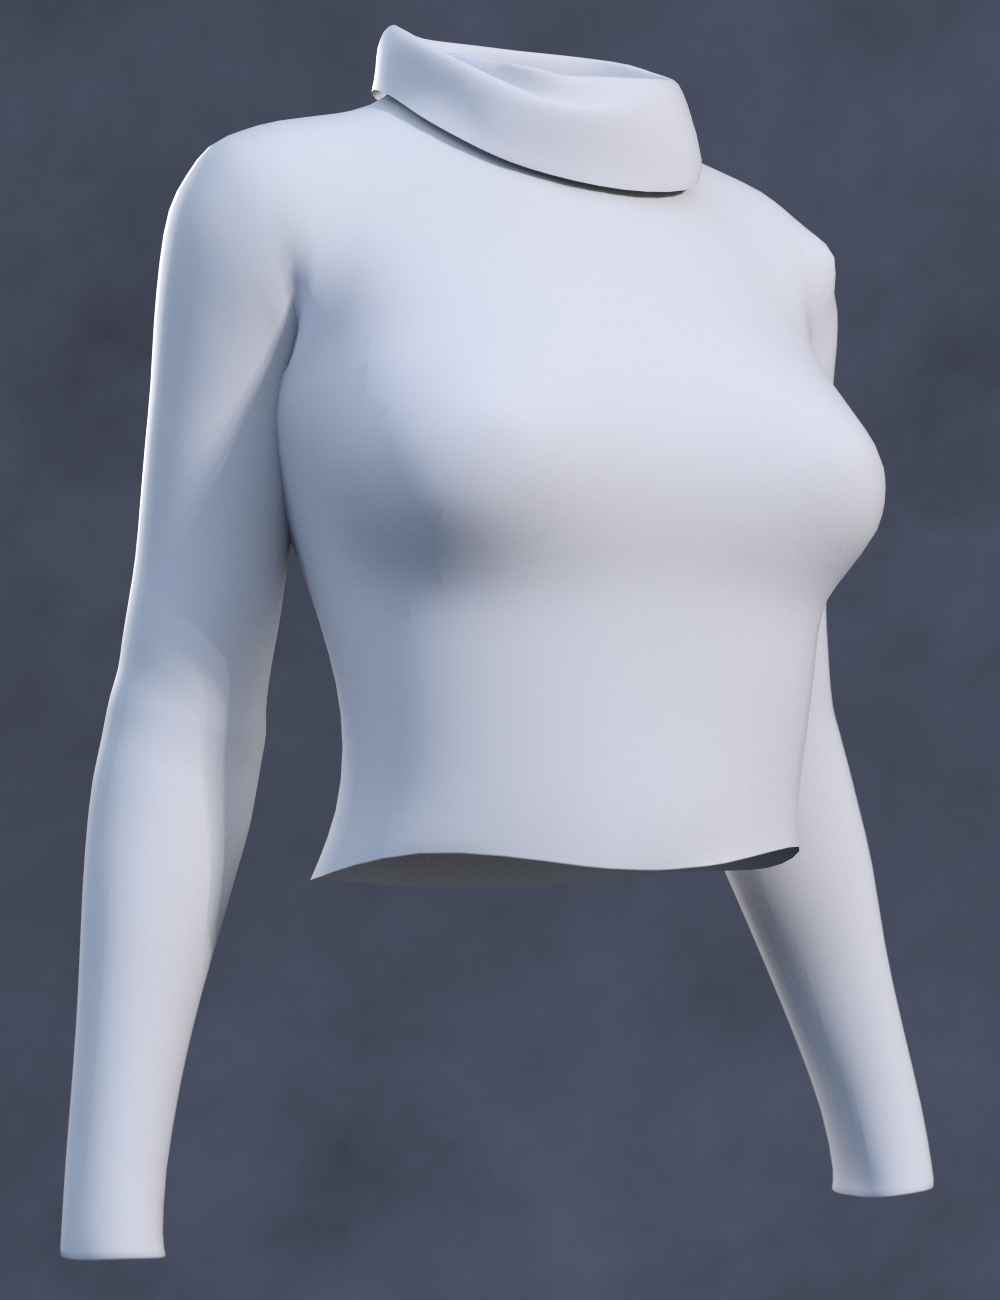 Casual Fashion Outfit Vol 2 Sweater for Genesis 8 and 8.1 Females by: fjaa3d, 3D Models by Daz 3D